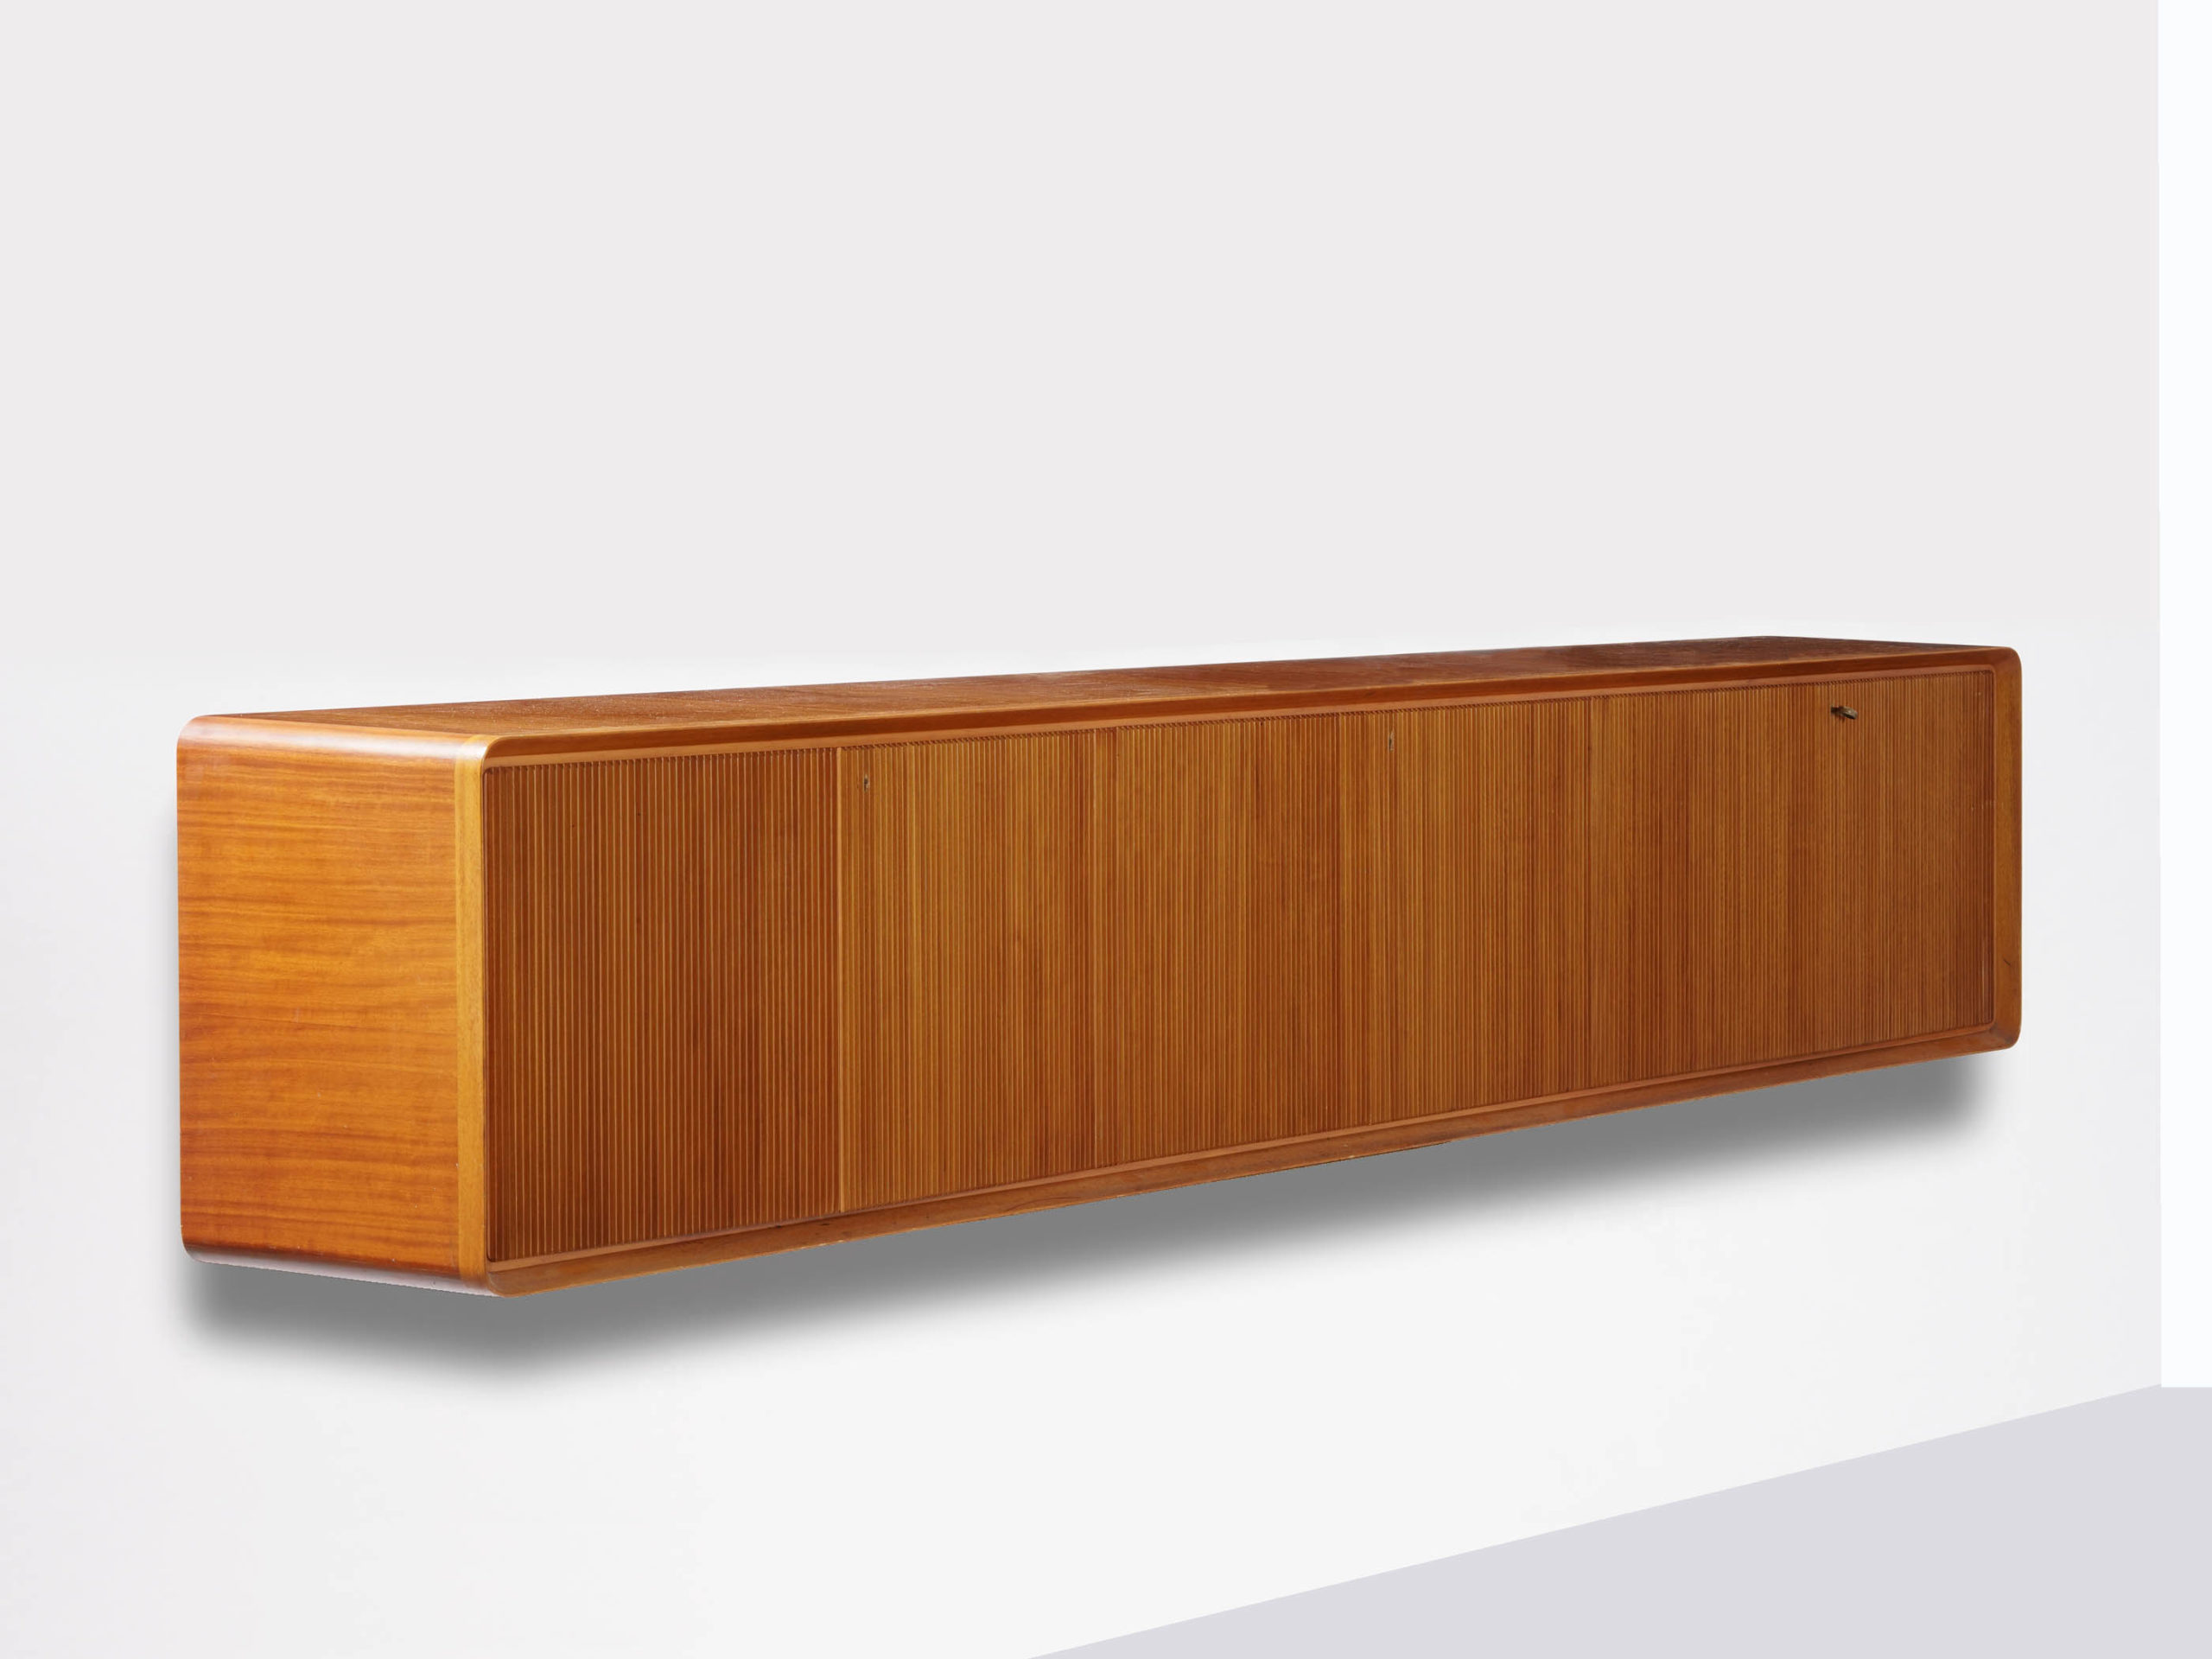 Suspended Sideboard with Vertical Slotted Wood Doors